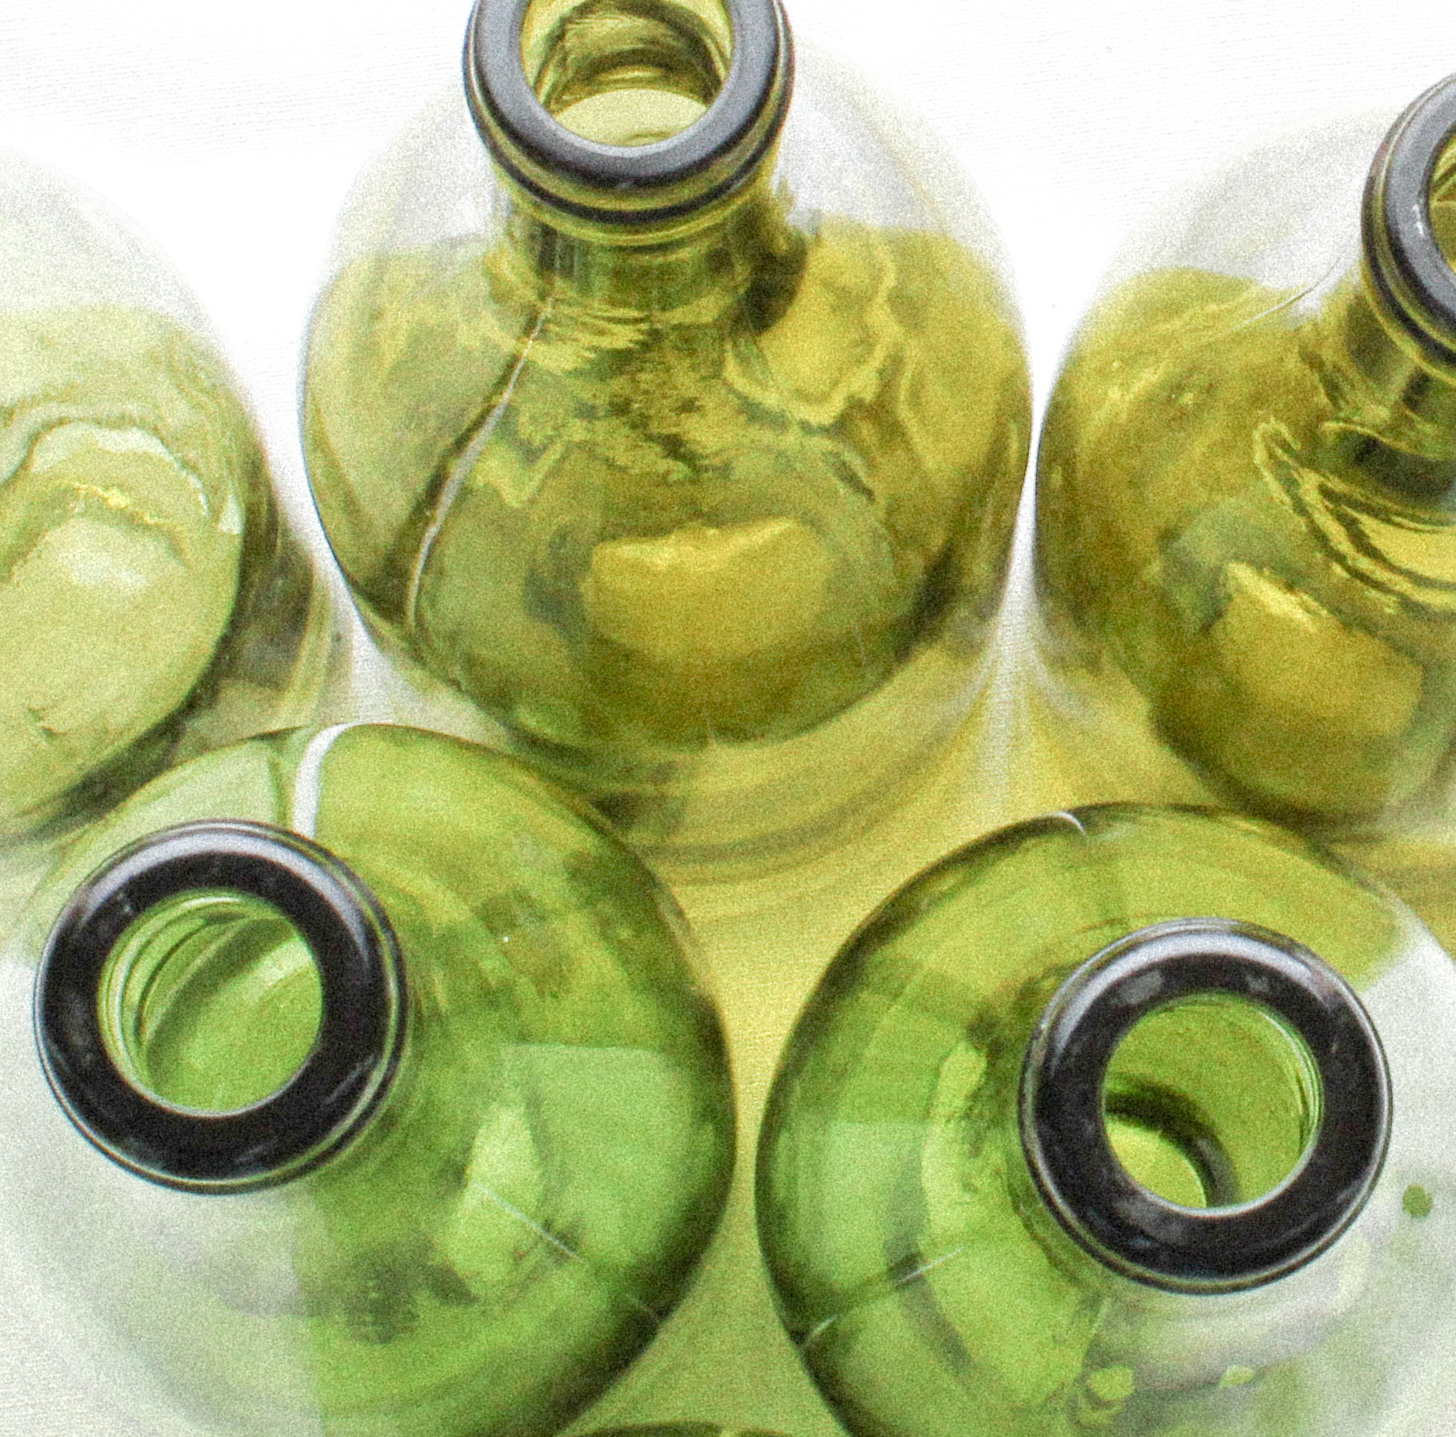 A collection of vintage French wine bottles to be used for recycled jewelry.